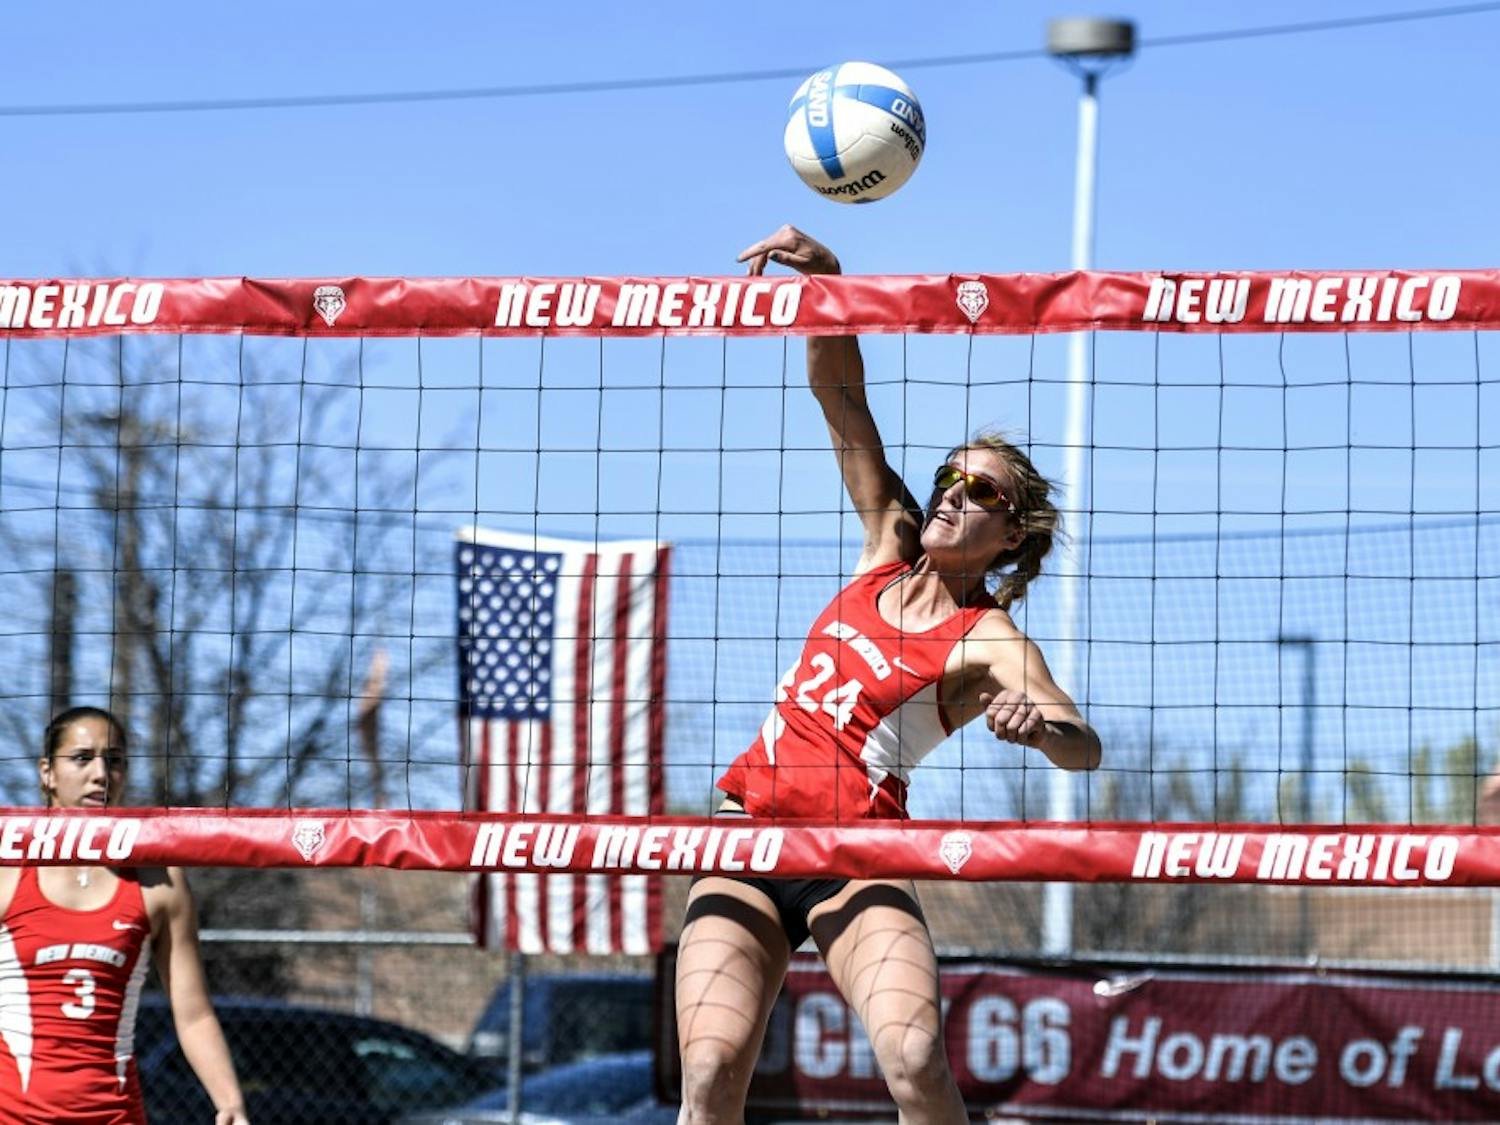 Junior Cassie House jumps up to spike the ball at Lucky 66 Bowl’s sand volleyball courts. The Lobos will play this weekend in California with their first game against Pacific this Friday. 